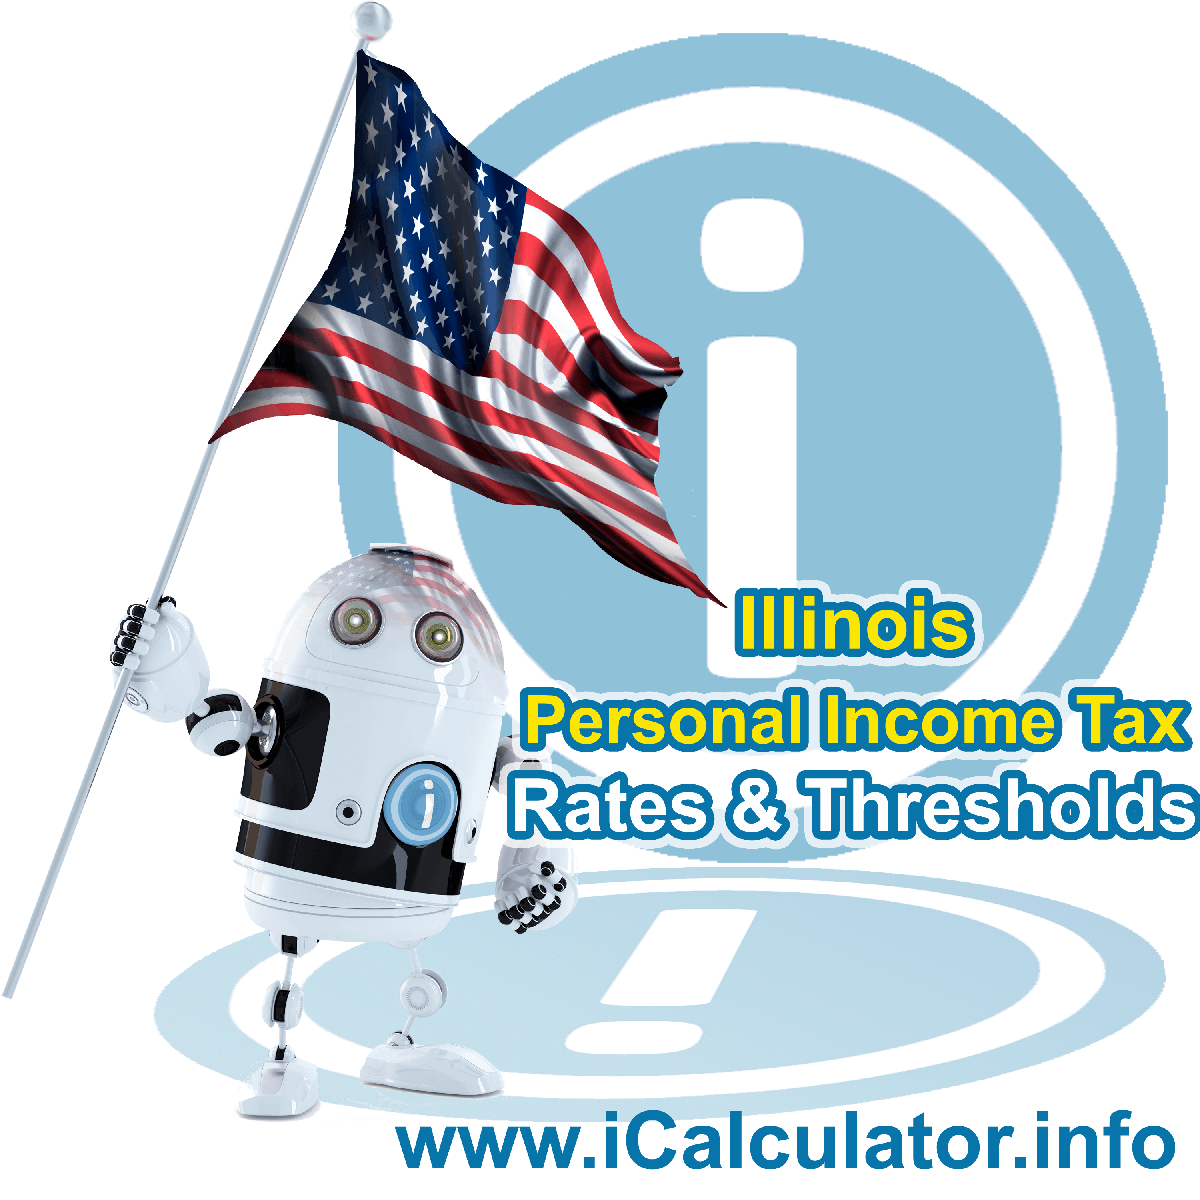 Illinois State Tax Tables 2016. This image displays details of the Illinois State Tax Tables for the 2016 tax return year which is provided in support of the 2016 US Tax Calculator